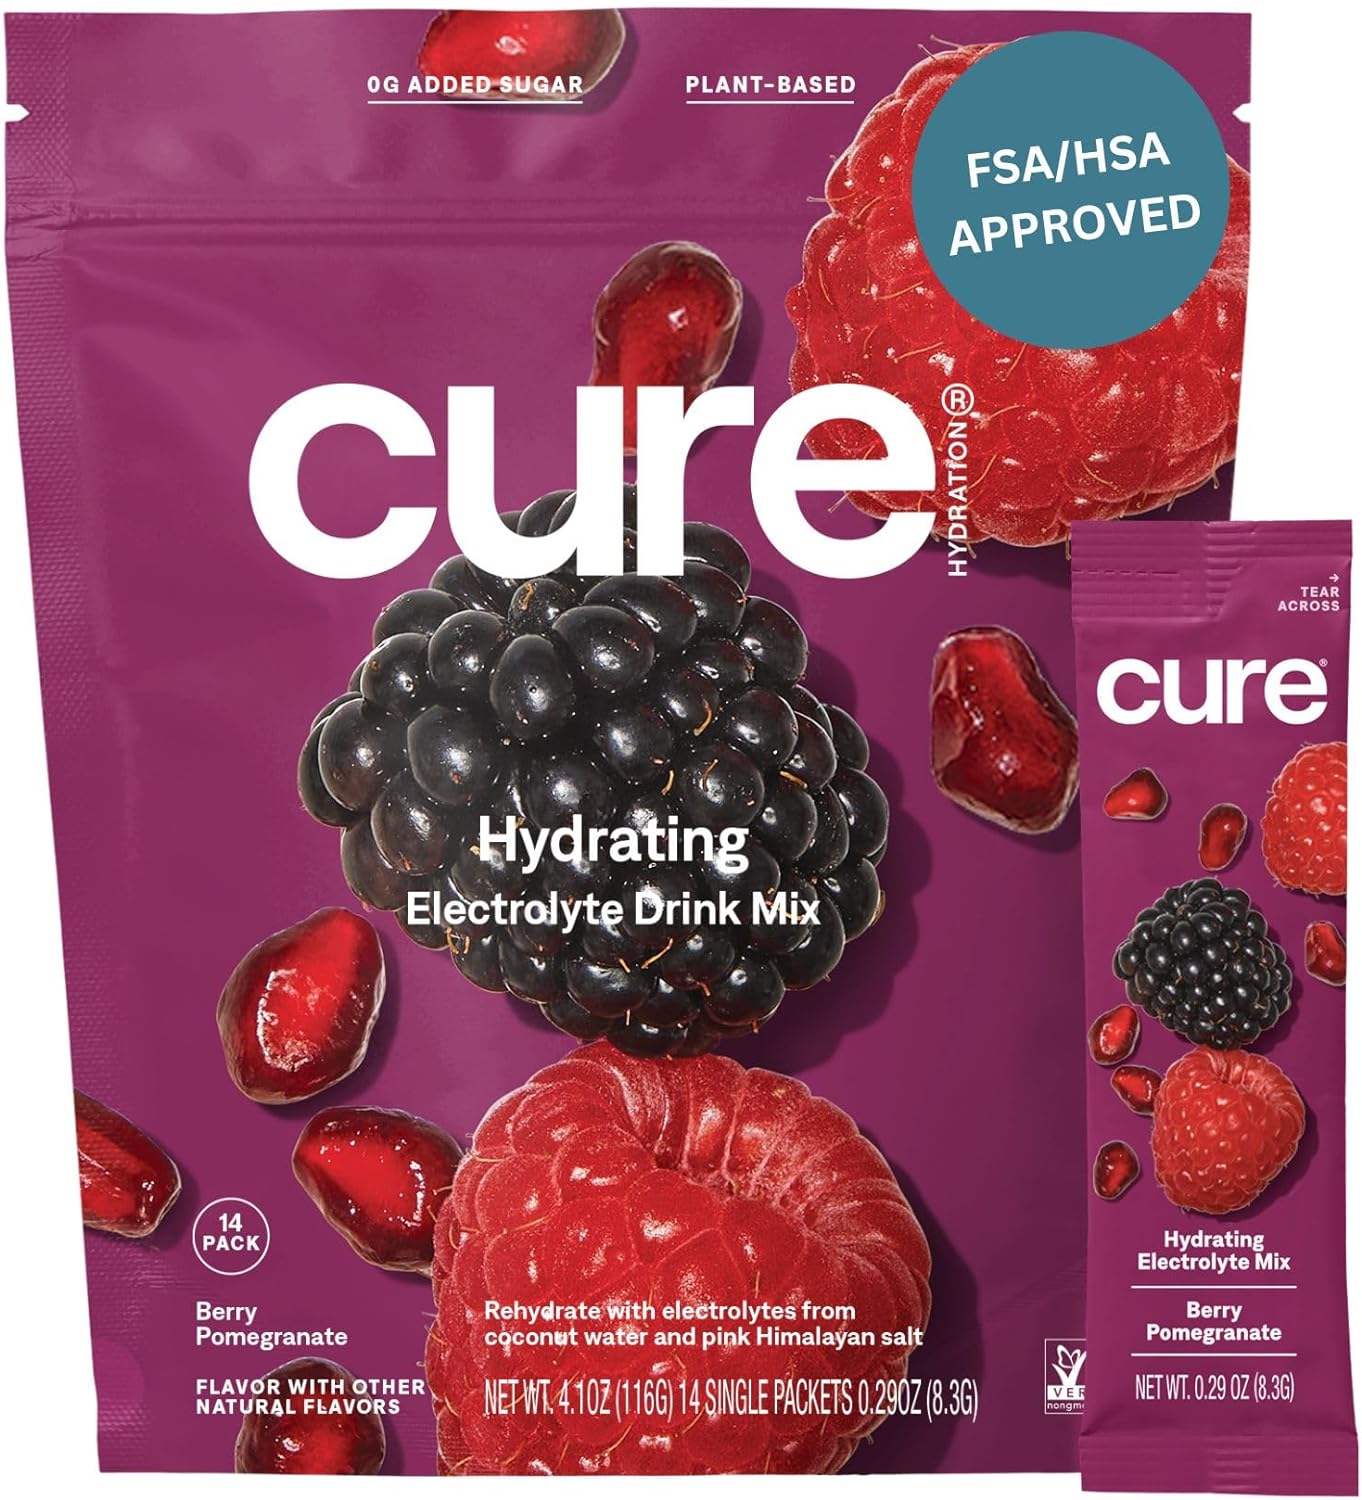 Cure Hydrating Plant Based Electrolyte Mix | FSA & HSA Eligible | Powder for Dehydration Relief | Made with Coconut Water | Non-GMO | No Added Sugar | Vegan | Pouch of 14 Packets - Berry Pomegranate